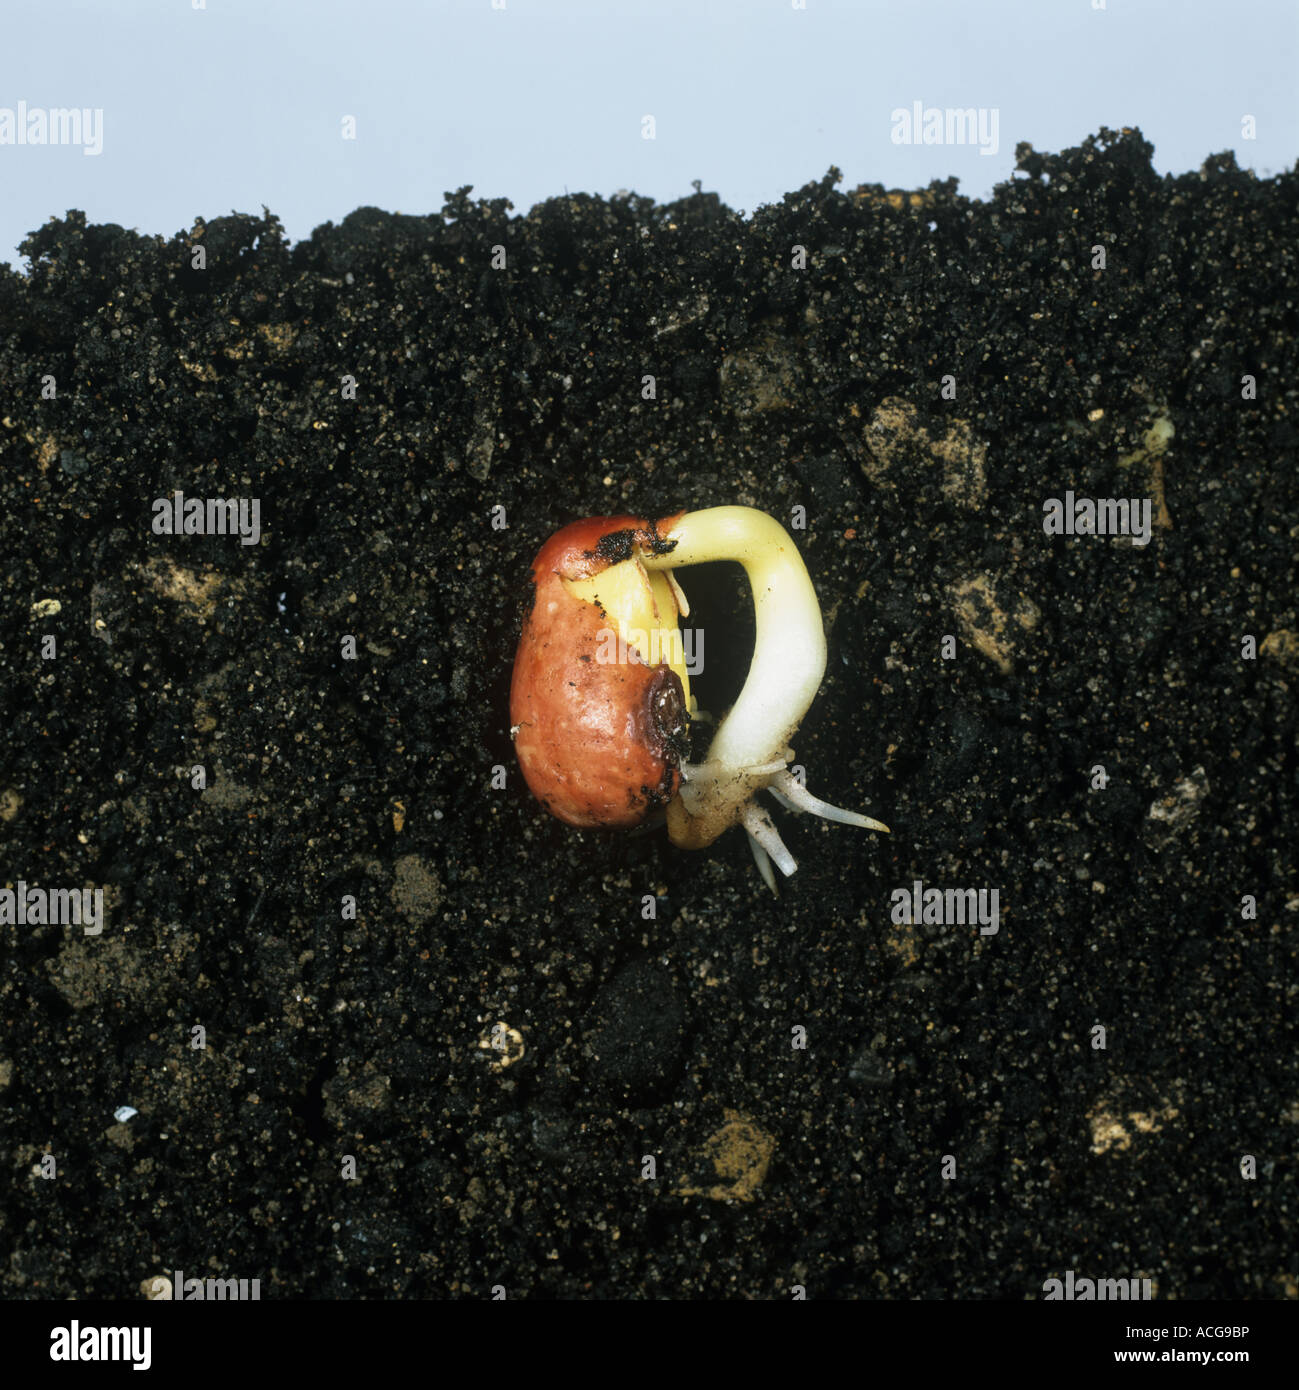 Bean seed germinating sequence 3 germinating seed Stock Photo